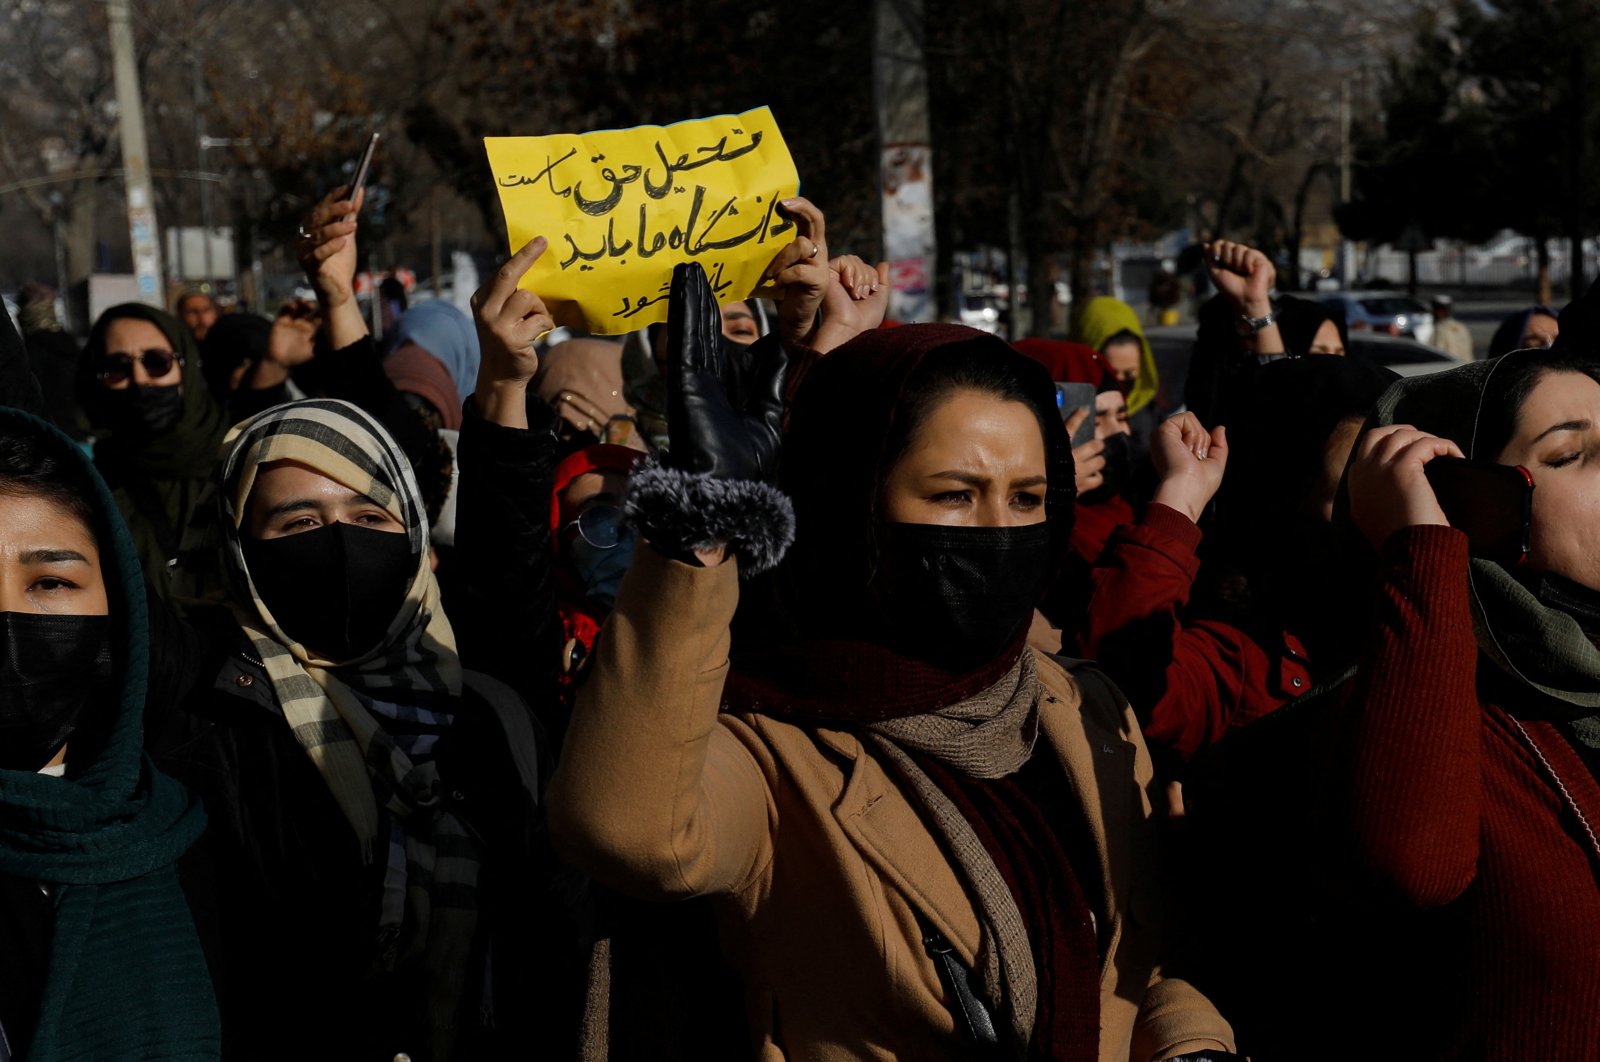 Afghan women chant slogans in protest against the closure of universities to women by the Taliban in Kabul, Afghanistan, Dec. 22, 2022. (Reuters Photo)